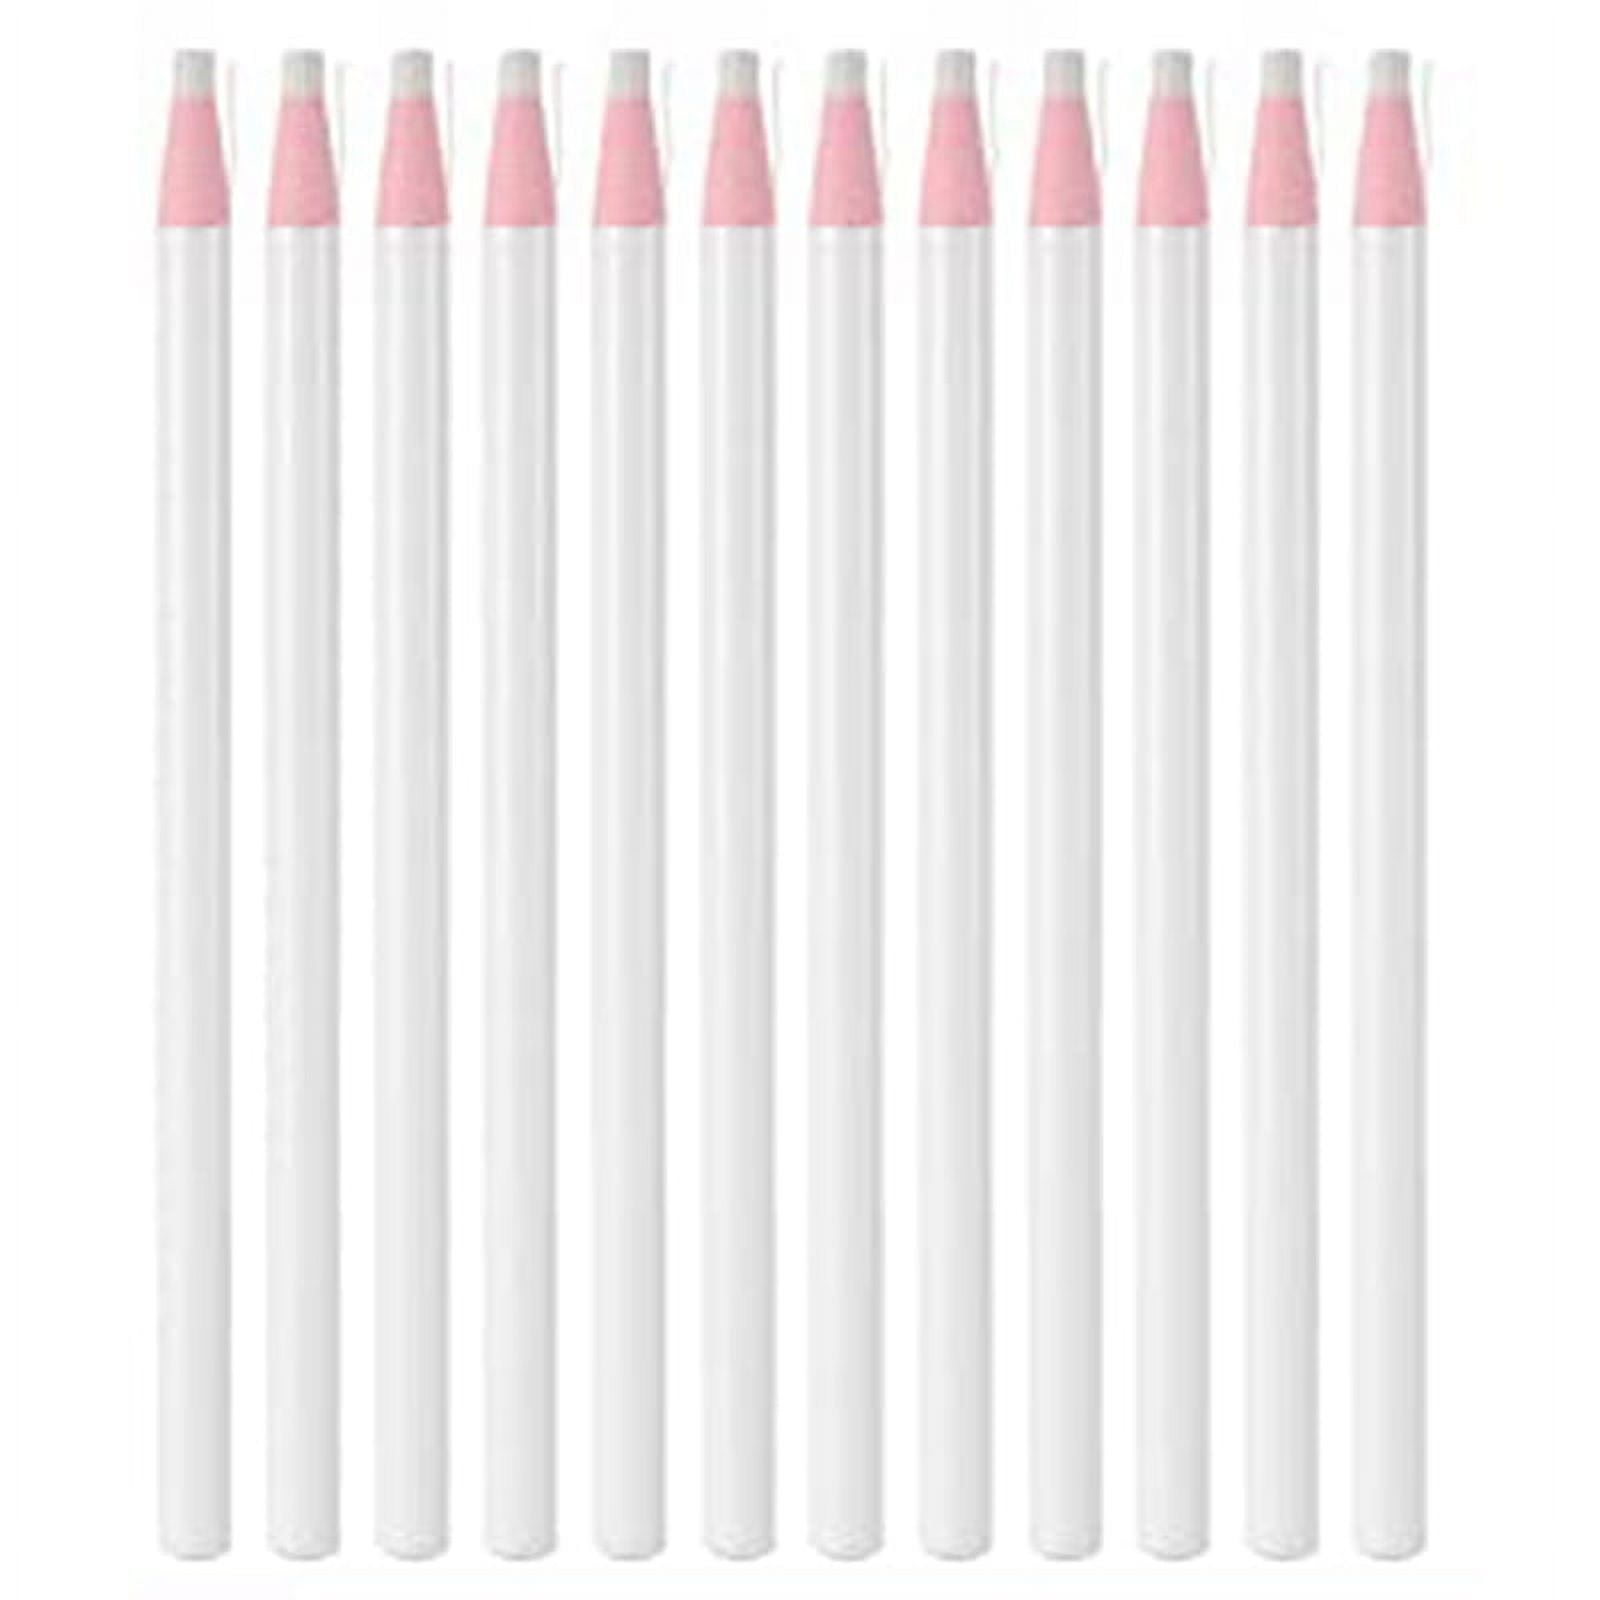 Sewing Mark Pencil 4pcs White Invisible Erasable Fabric Pencils For Sewing  Marki